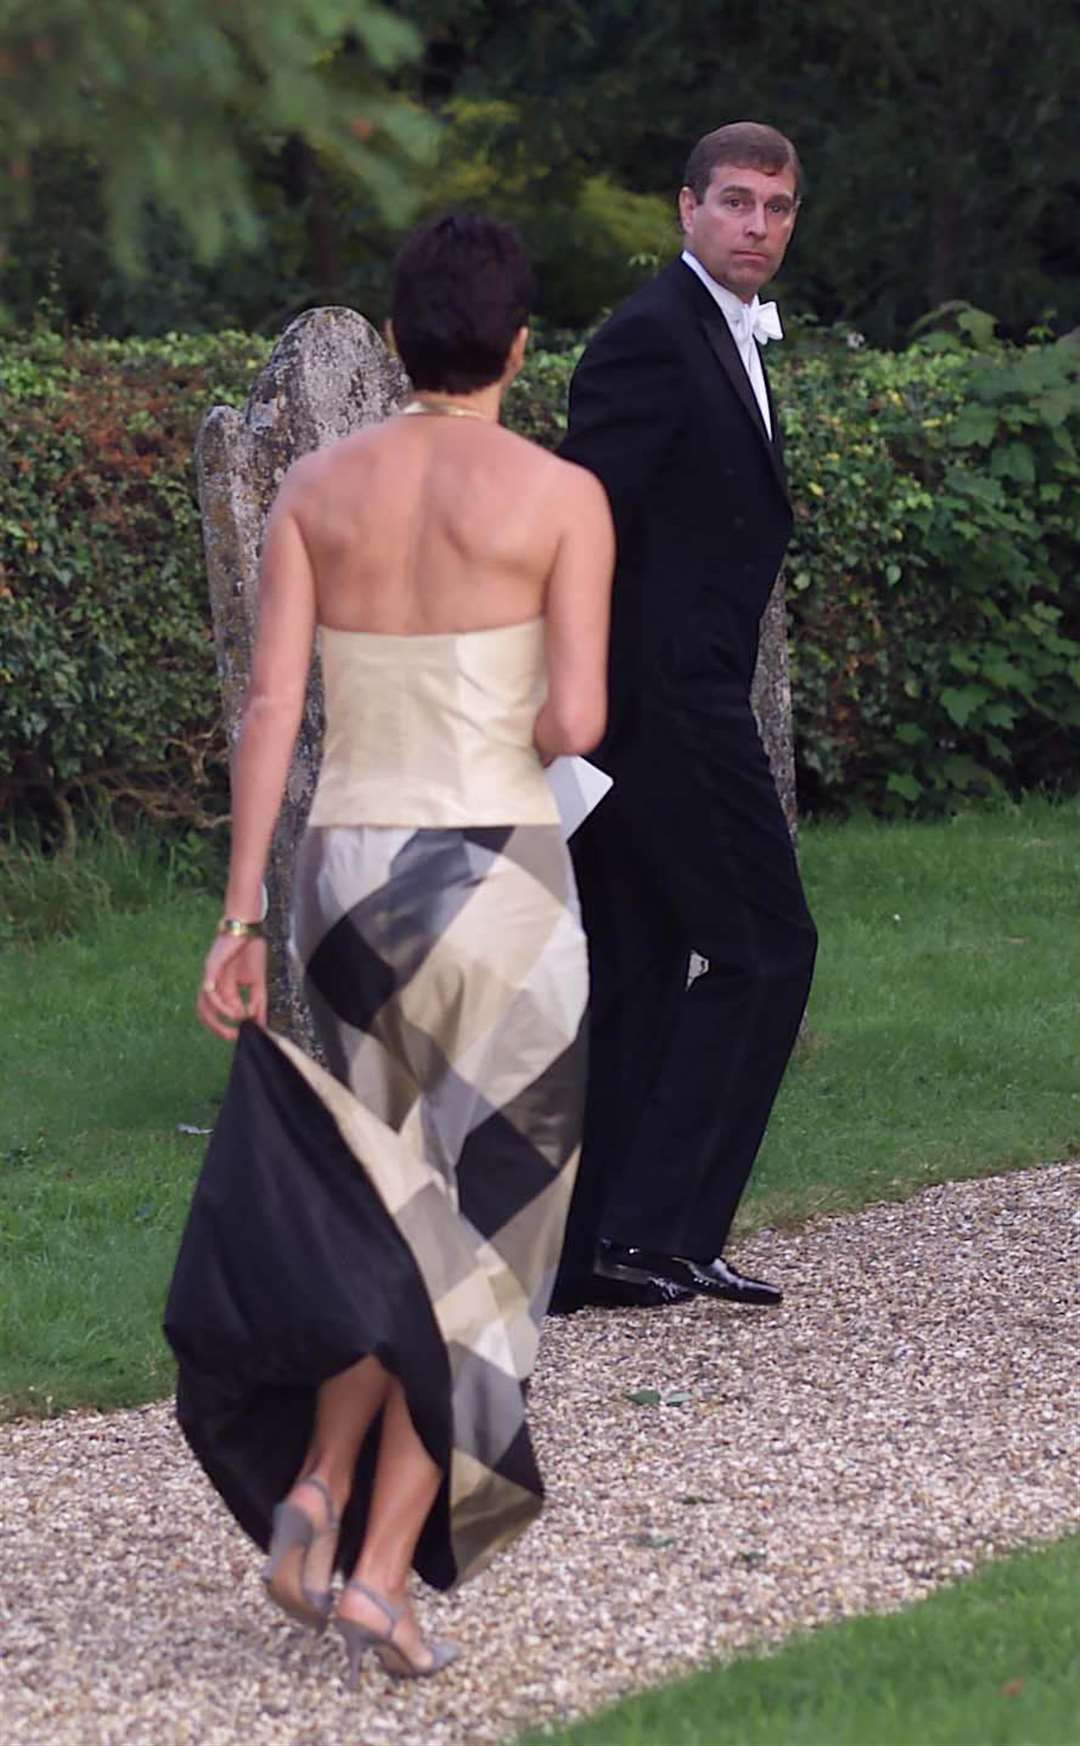 Ghislaine Maxwell and the Duke of York, seen leaving a society wedding in 2000 (Chris Ison/PA)